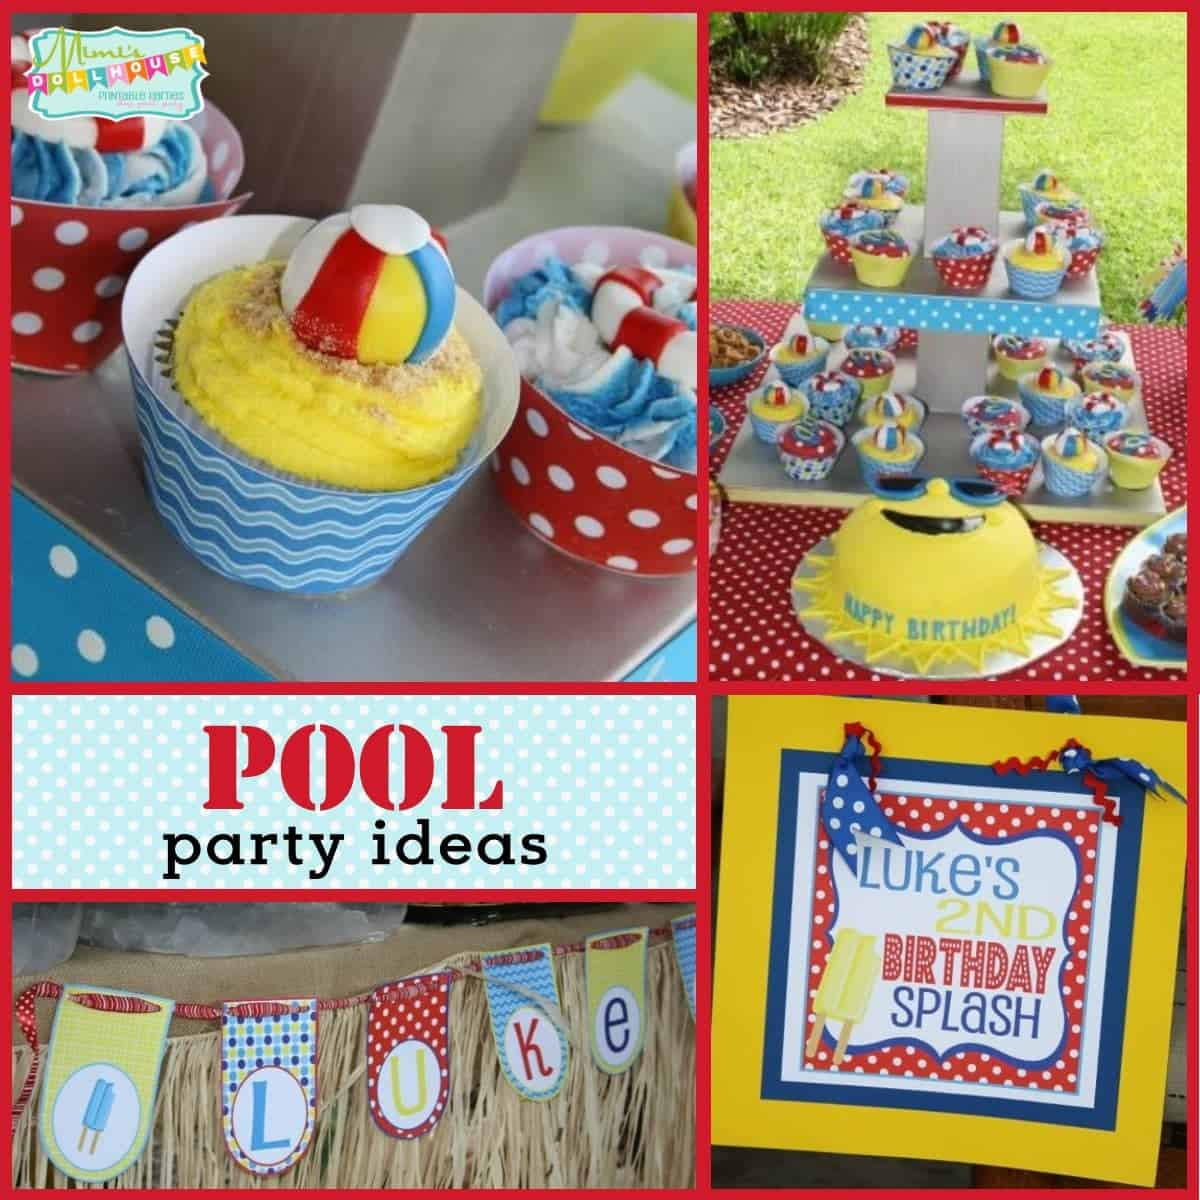 Princess Pool Party Ideas
 Pool Party Decorations Luke s Pool Party Birthday Party